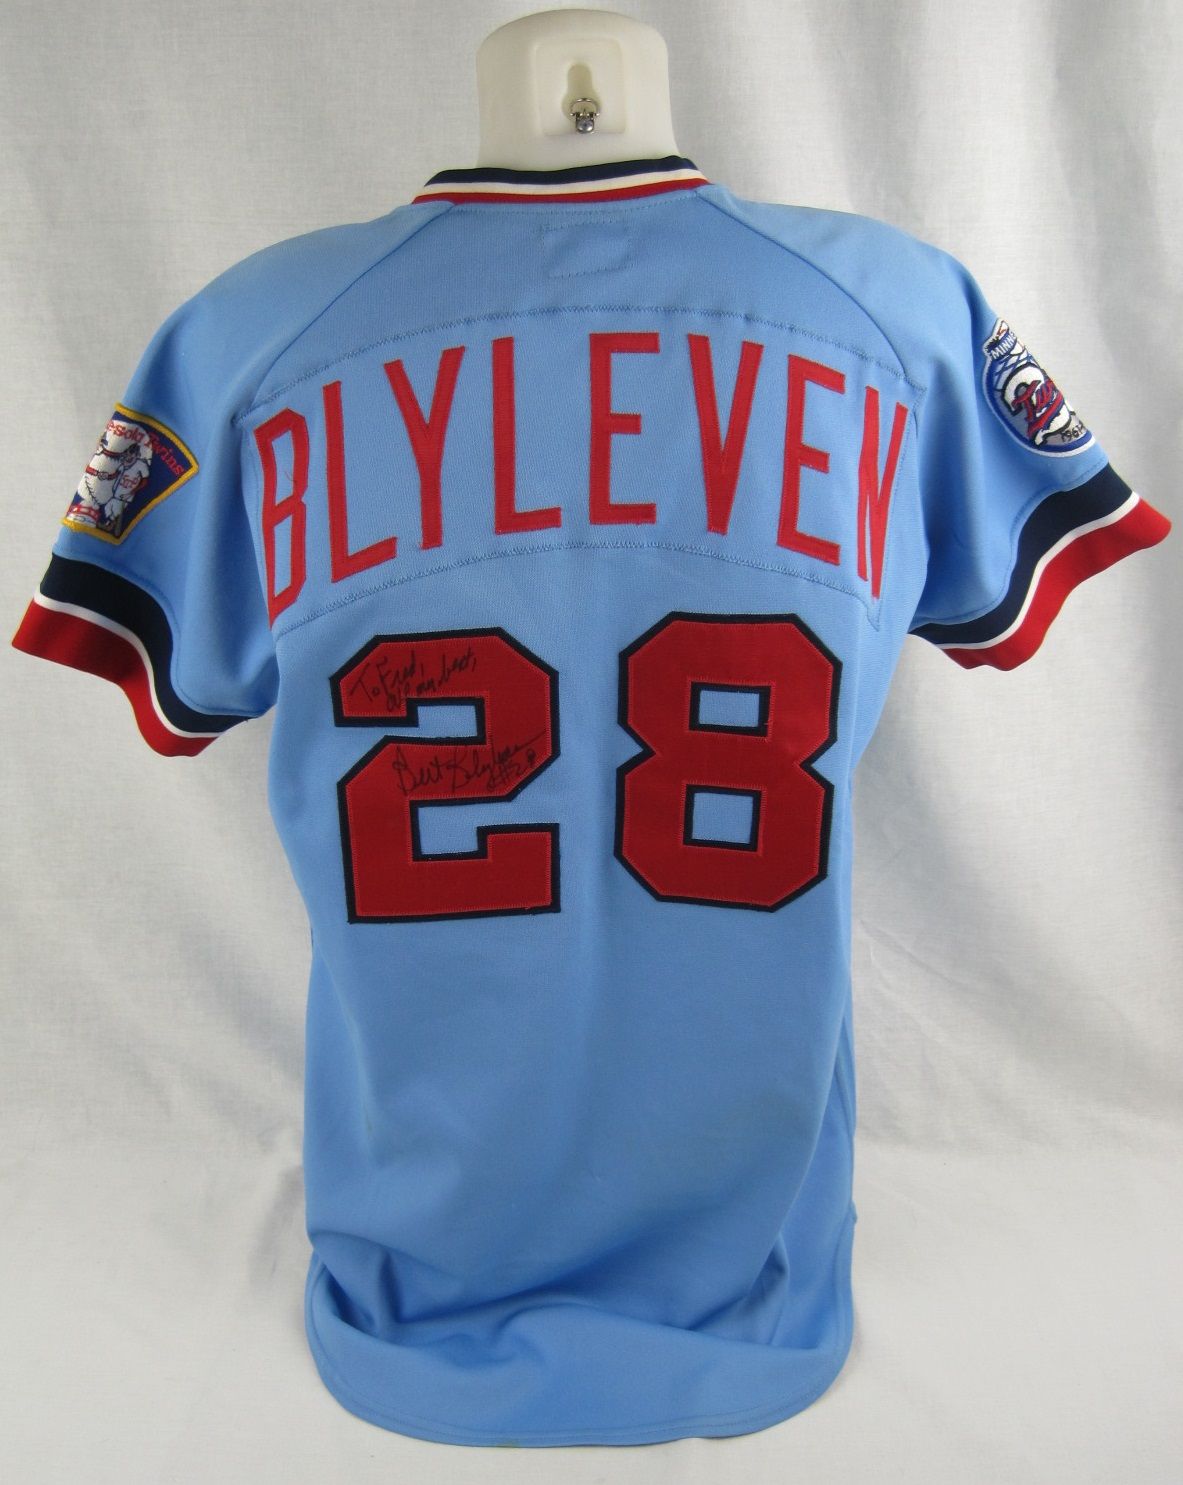 Prototype Twins jersey from 1972 before they settled on using their classic  powder blue design. : r/minnesotatwins